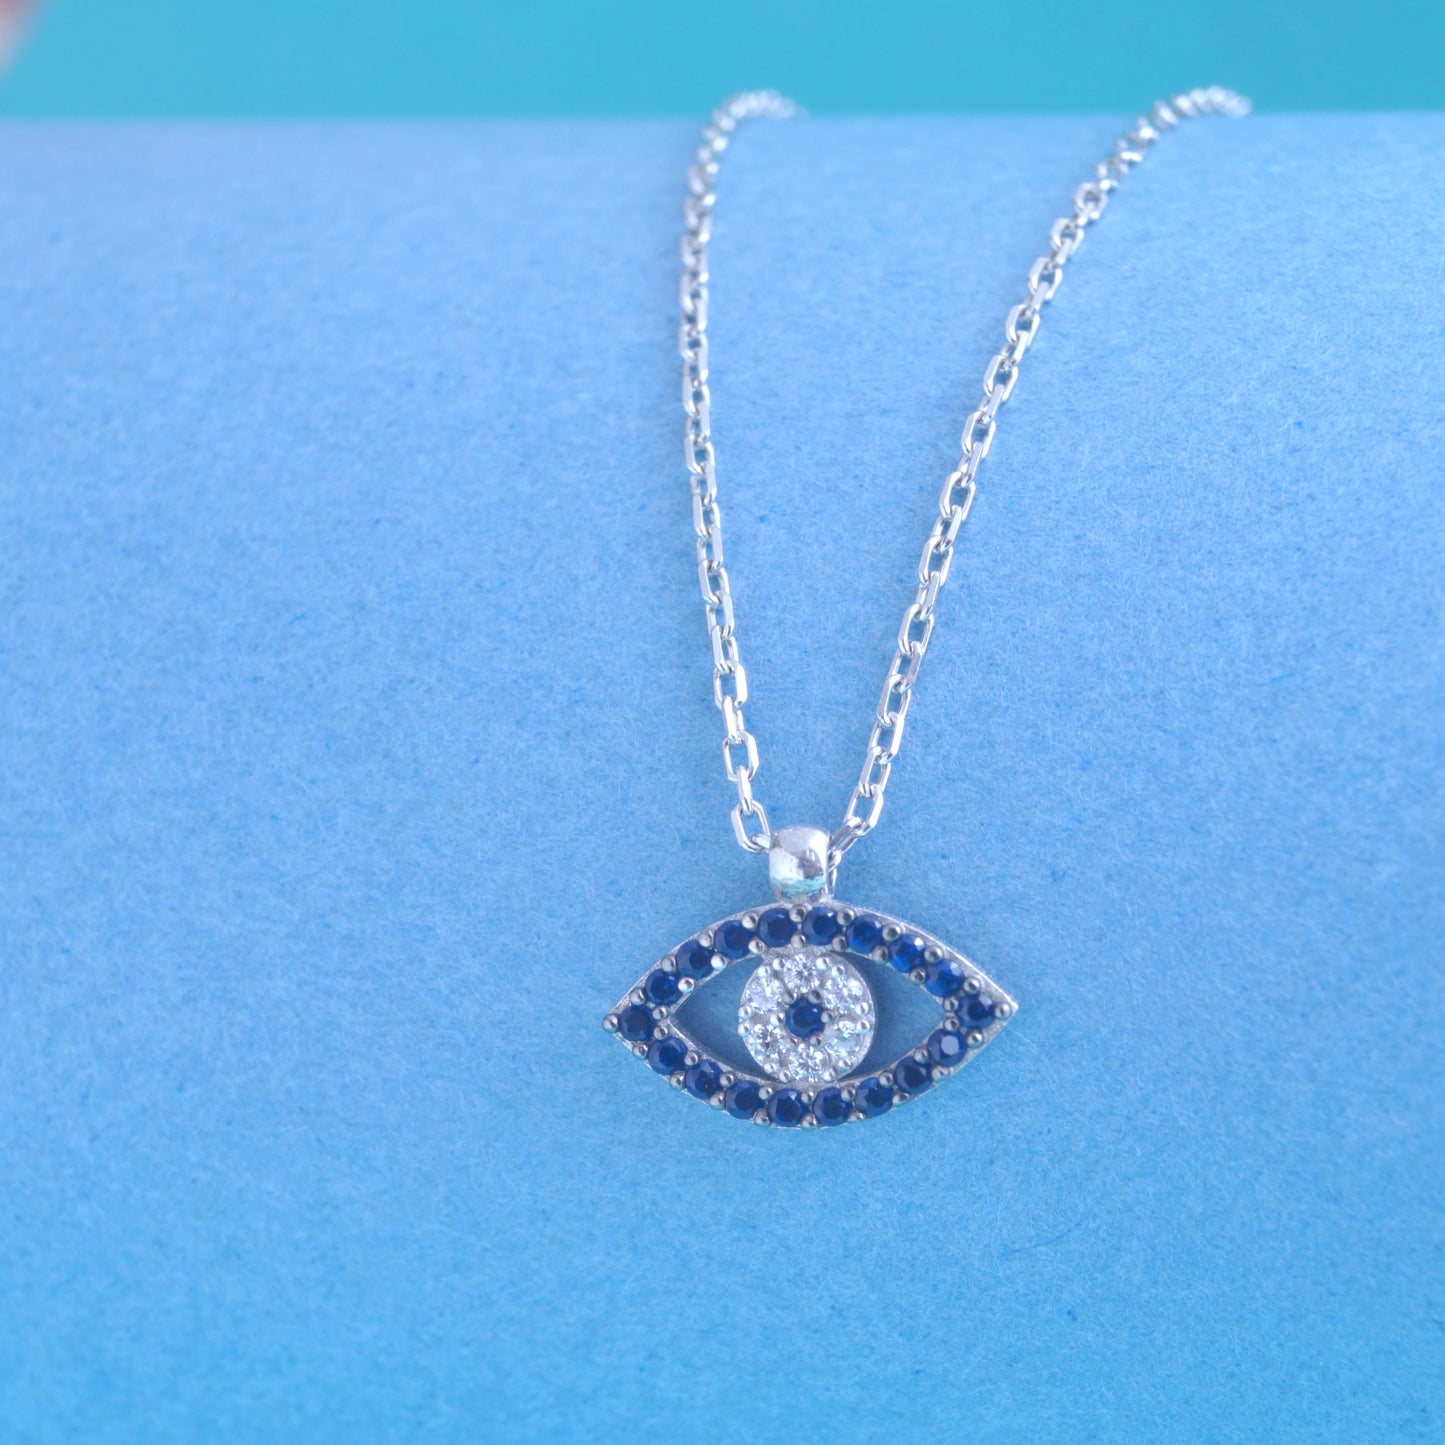 evil eye chain necklace 